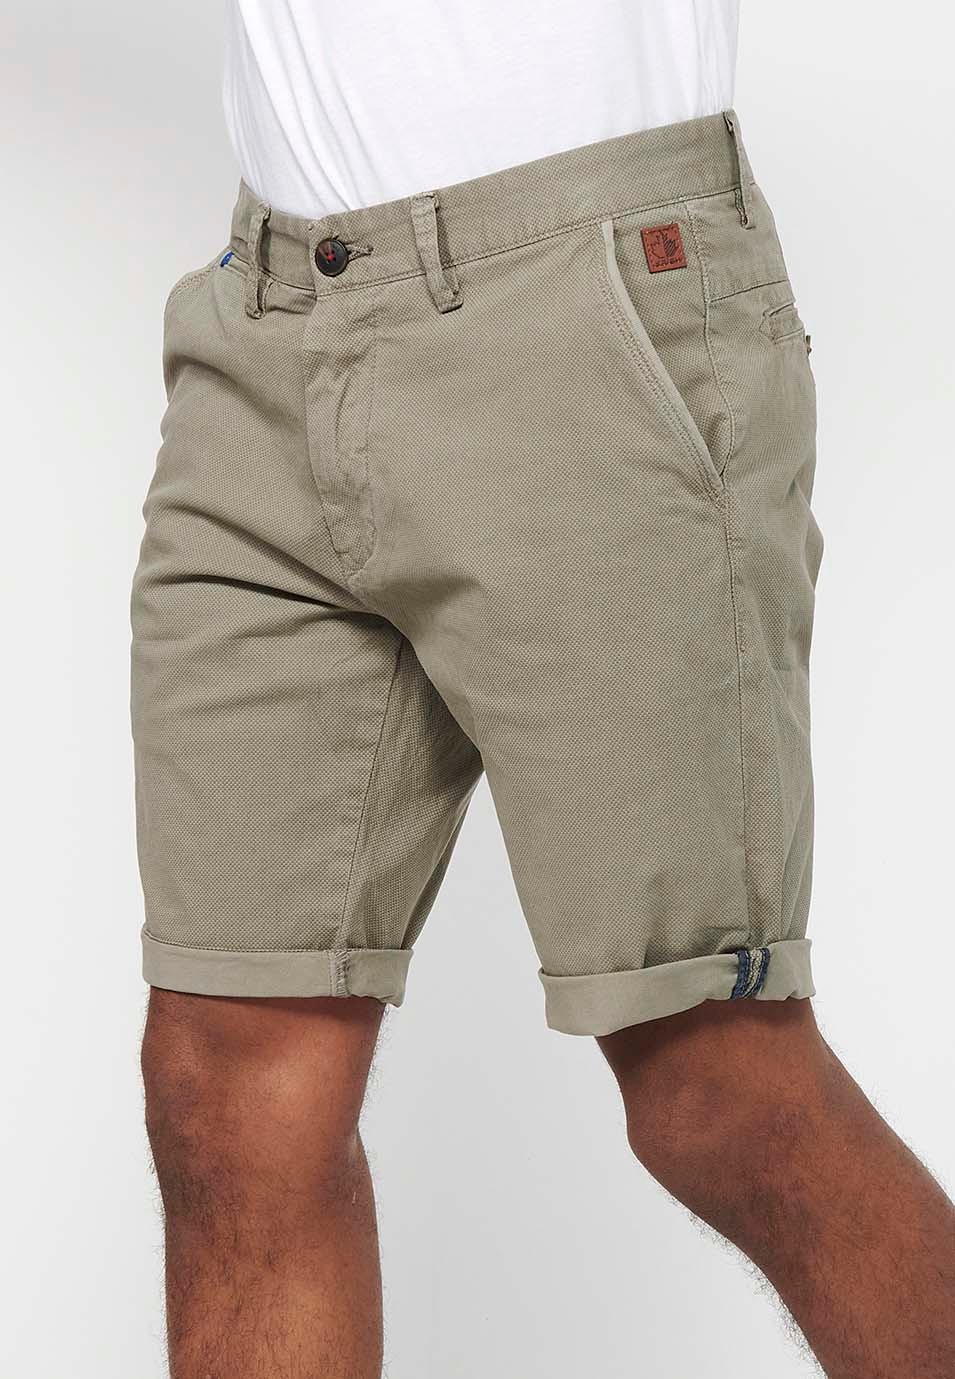 Men's Bermuda Chino Shorts with Turn-Up Finish with Front Zipper and Button Closure with Four Pockets in Mink Color 2